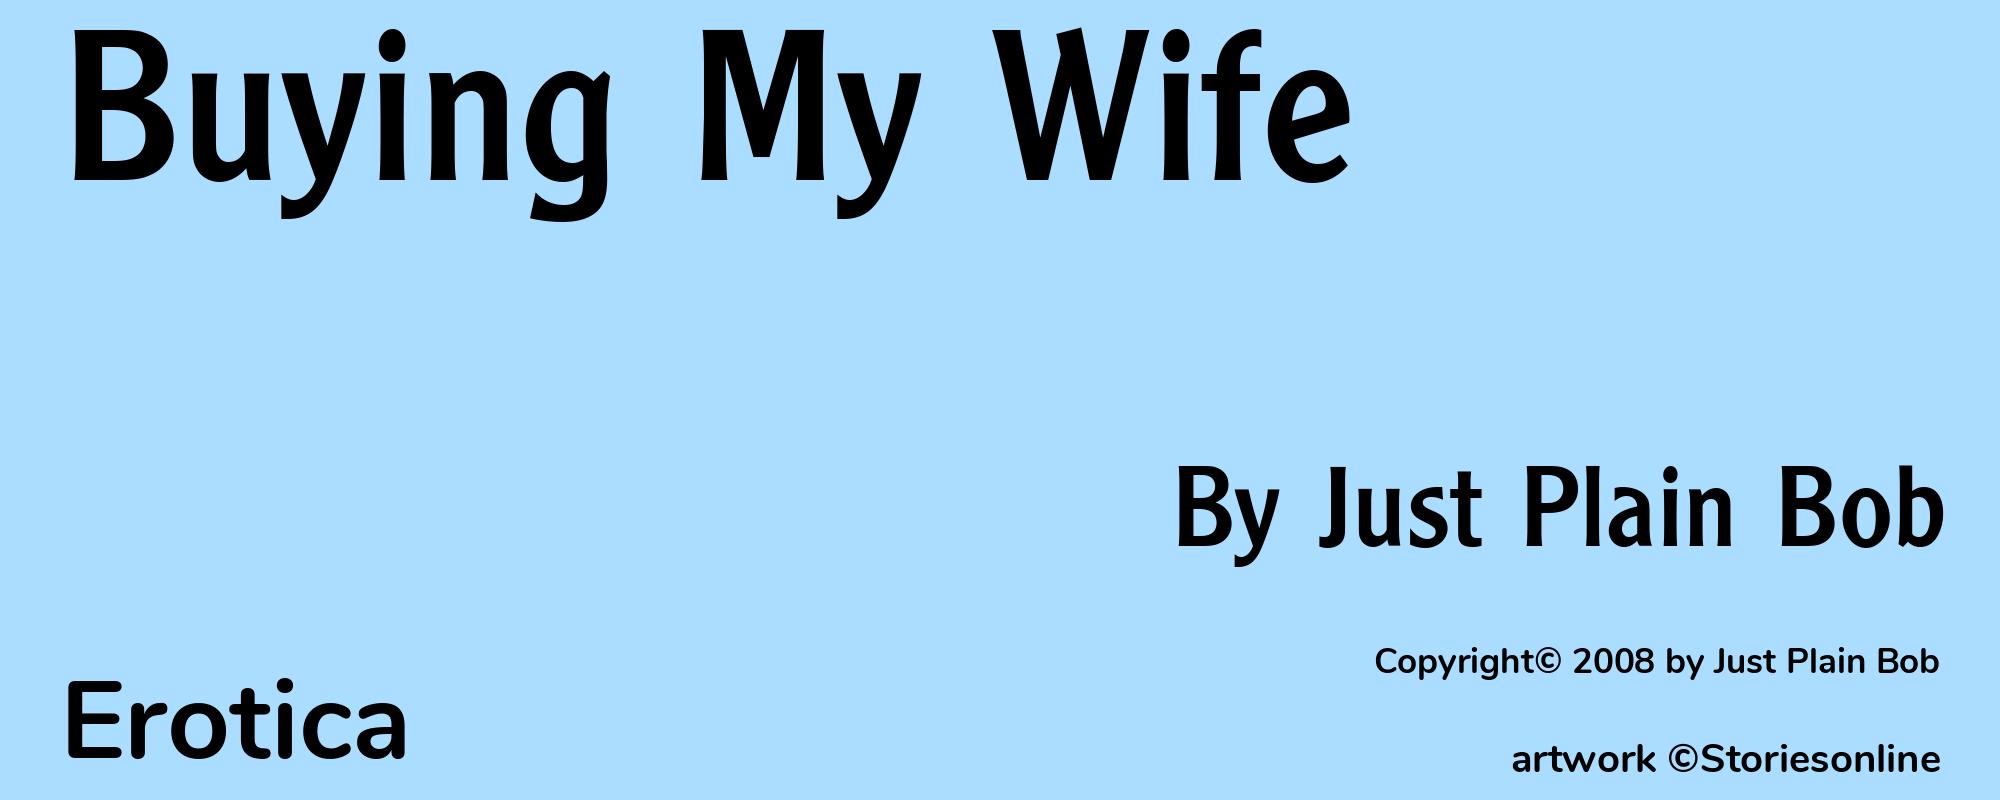 Buying My Wife - Cover